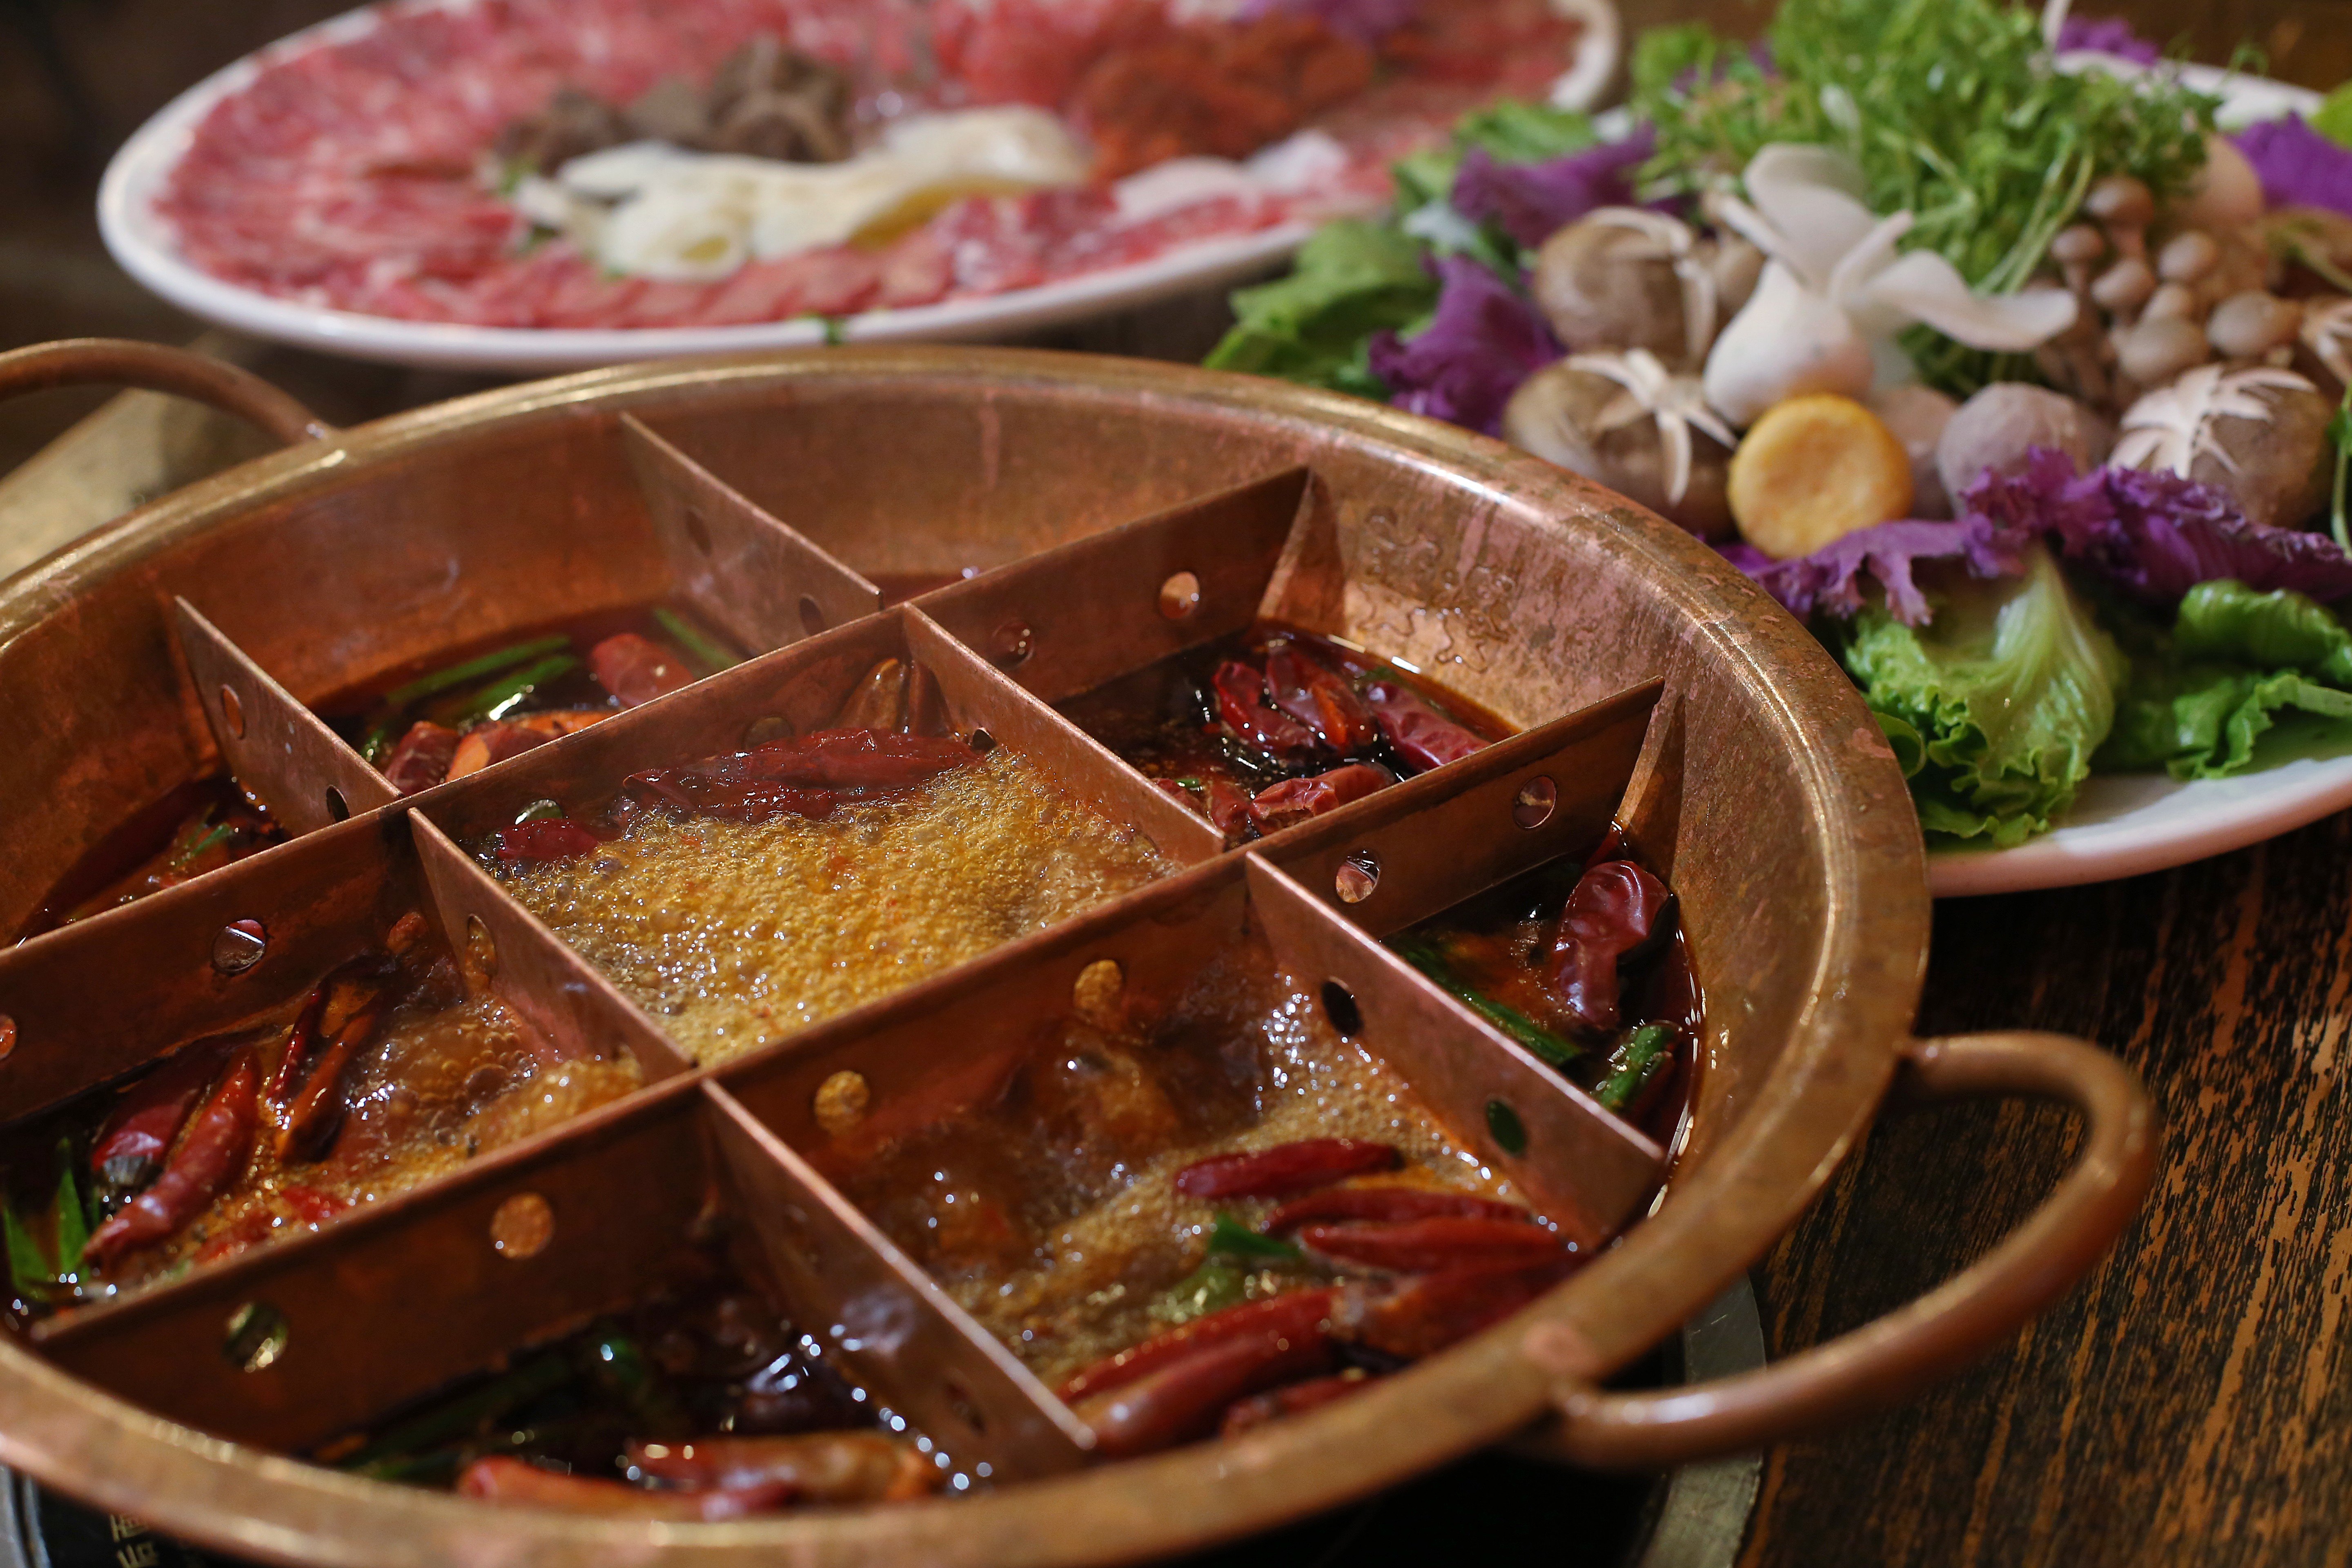 A spicy hotpot with an array of ingredients at Chuan Po Po in Tsim Sha Tsui. Photo: Edmond So